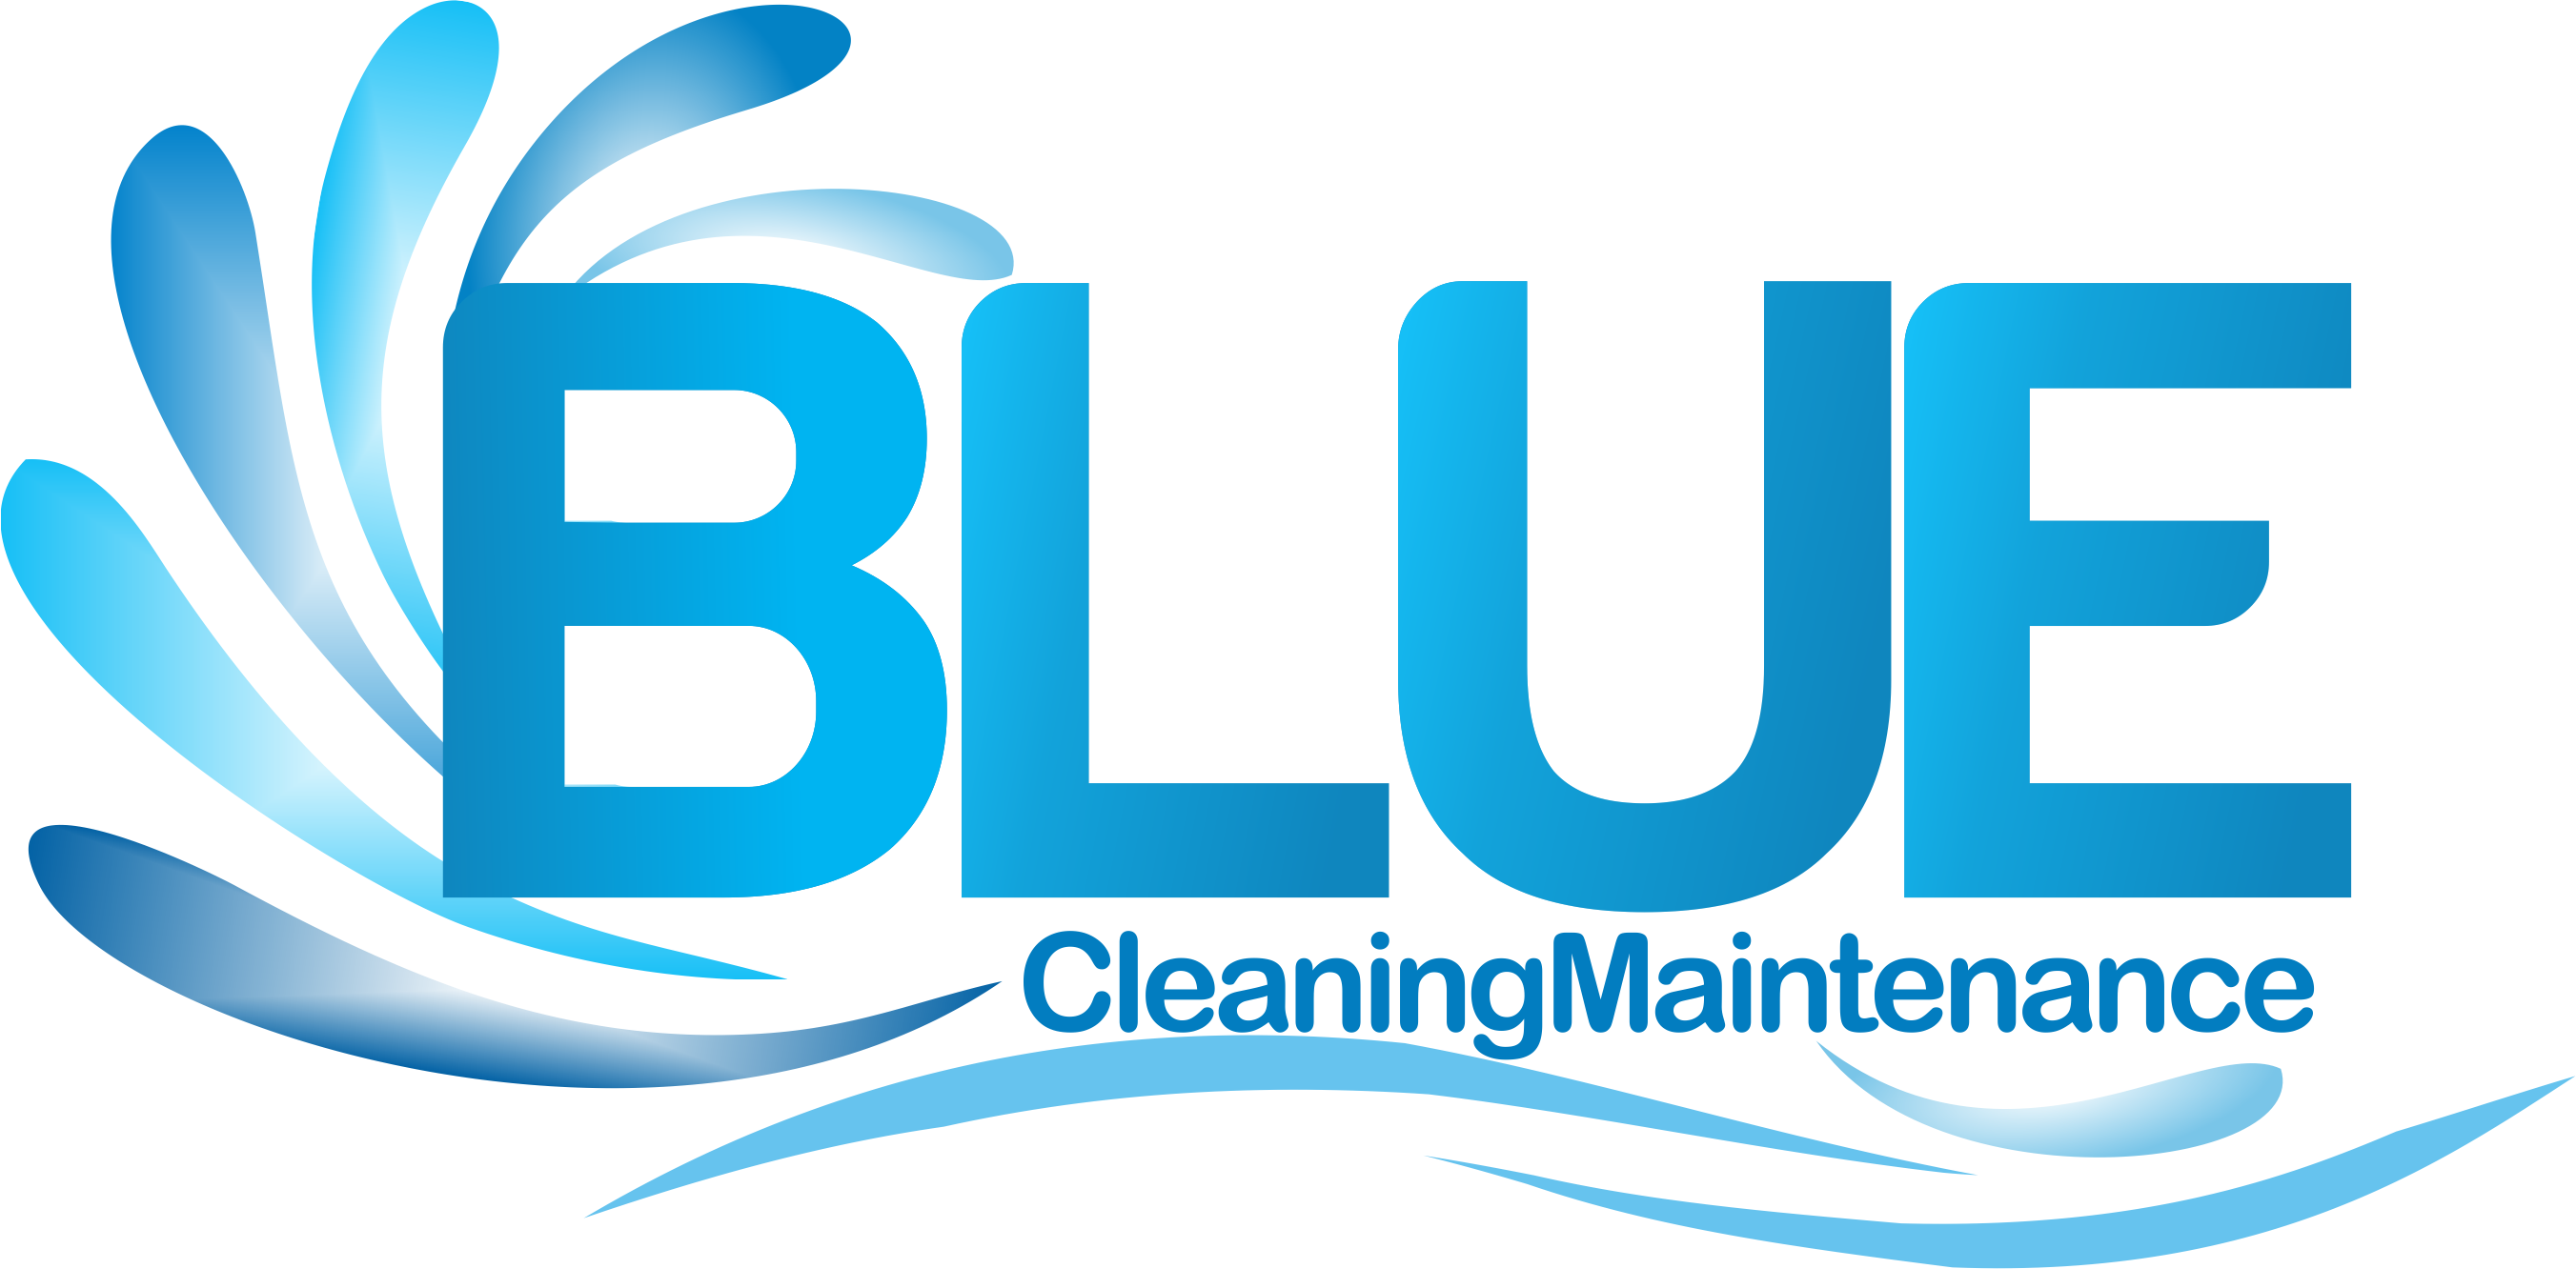 Blue Cleaning Maintenance